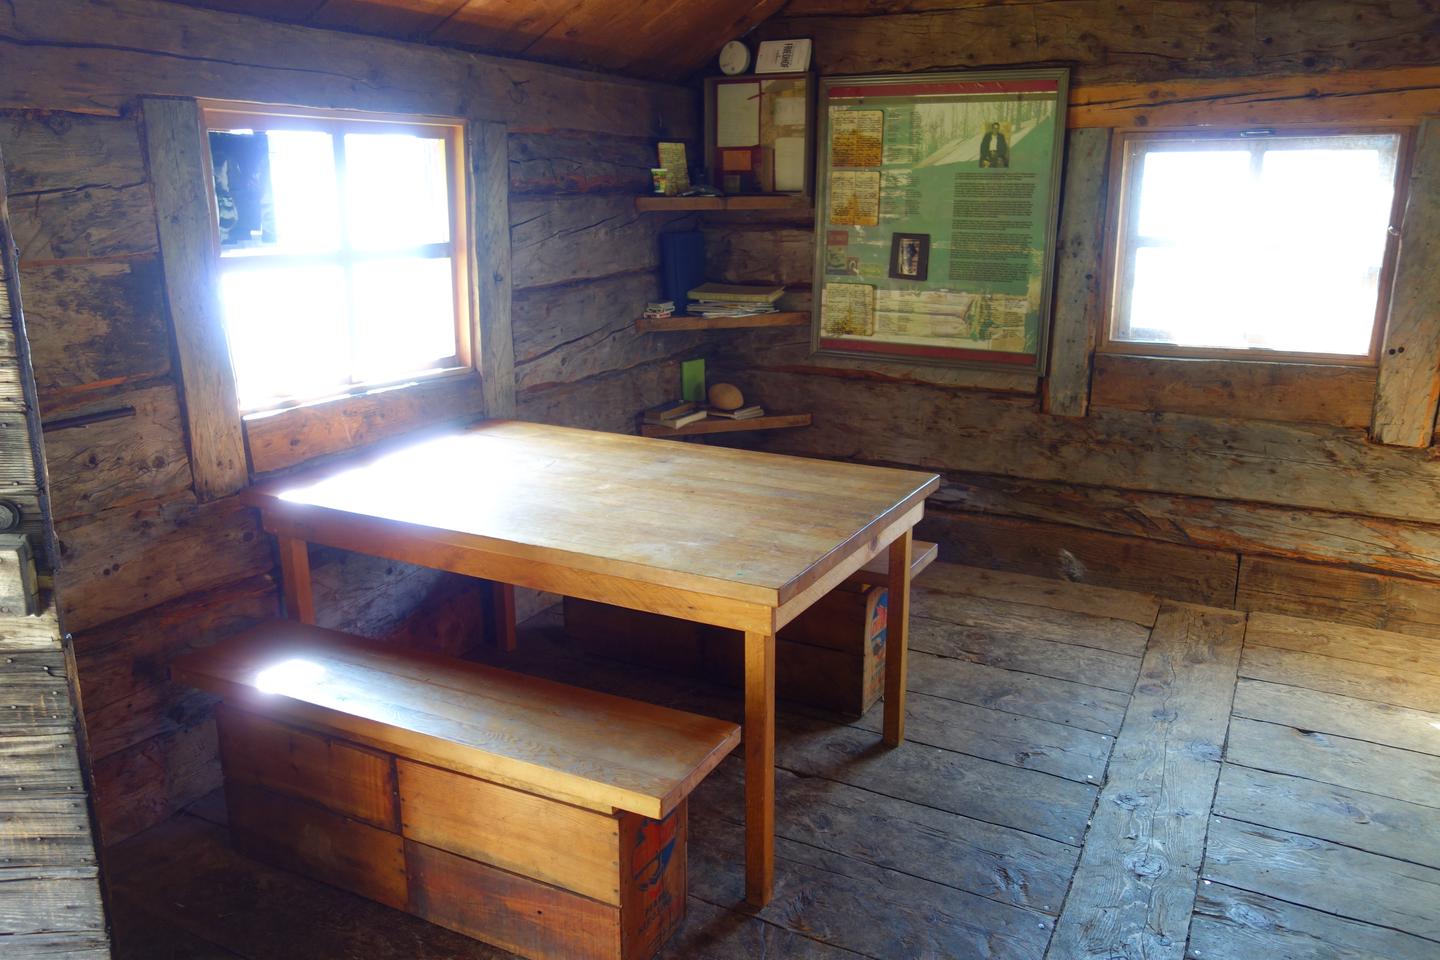 A wooden table and bench sit next to a wall with windows and an informational sign.Fure's Cabin has a table and benches and information about Roy Fure.